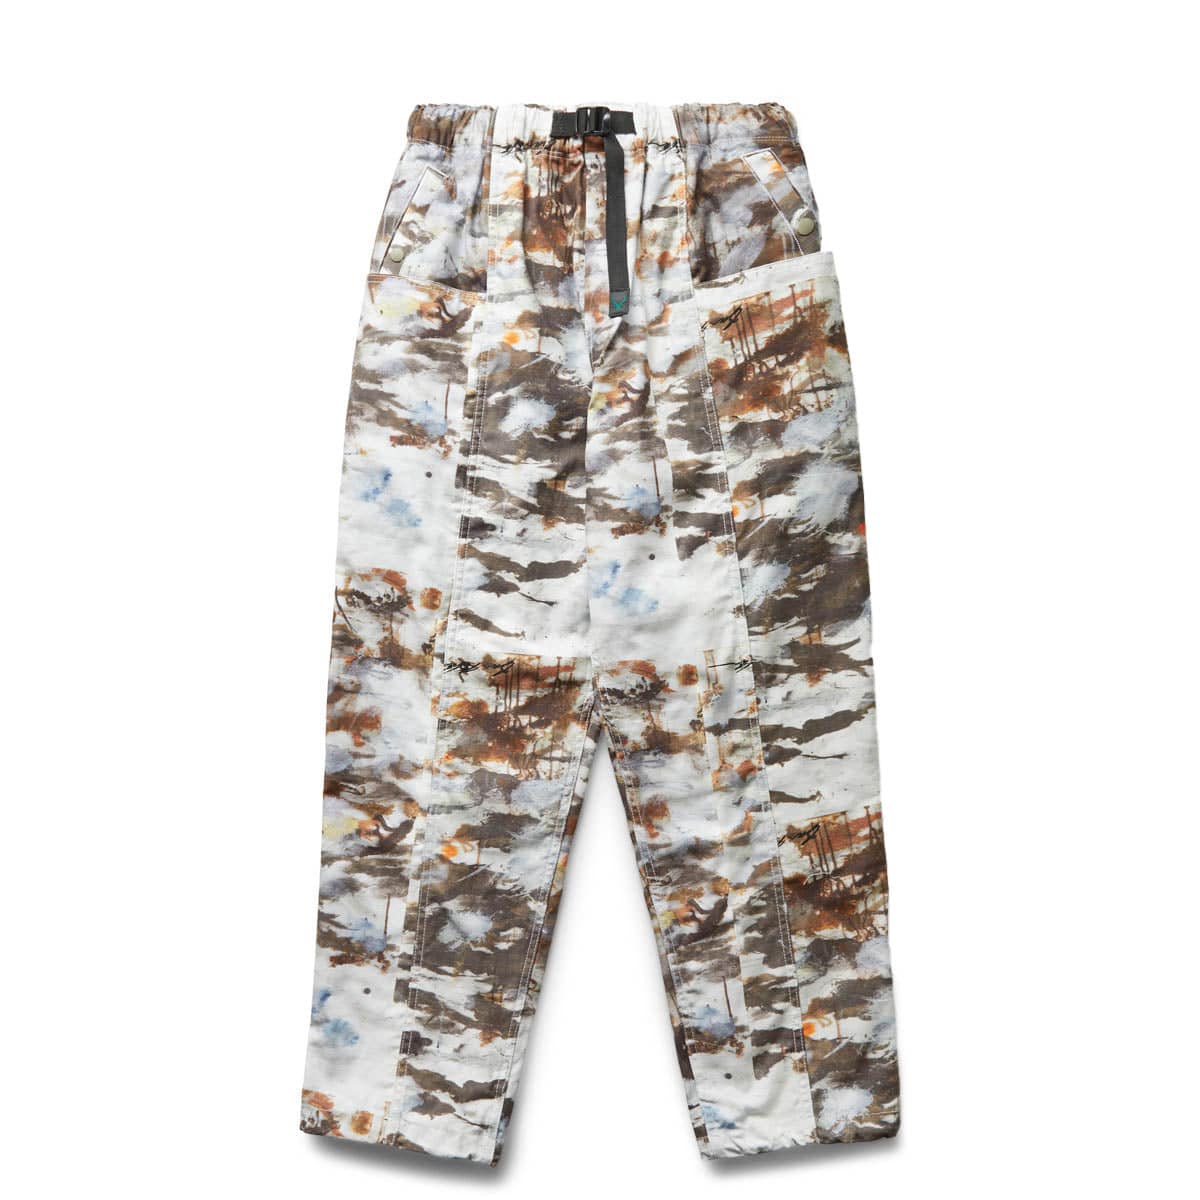 South2 West8 Bottoms X BEN MILLER BELTED C.S. PANT